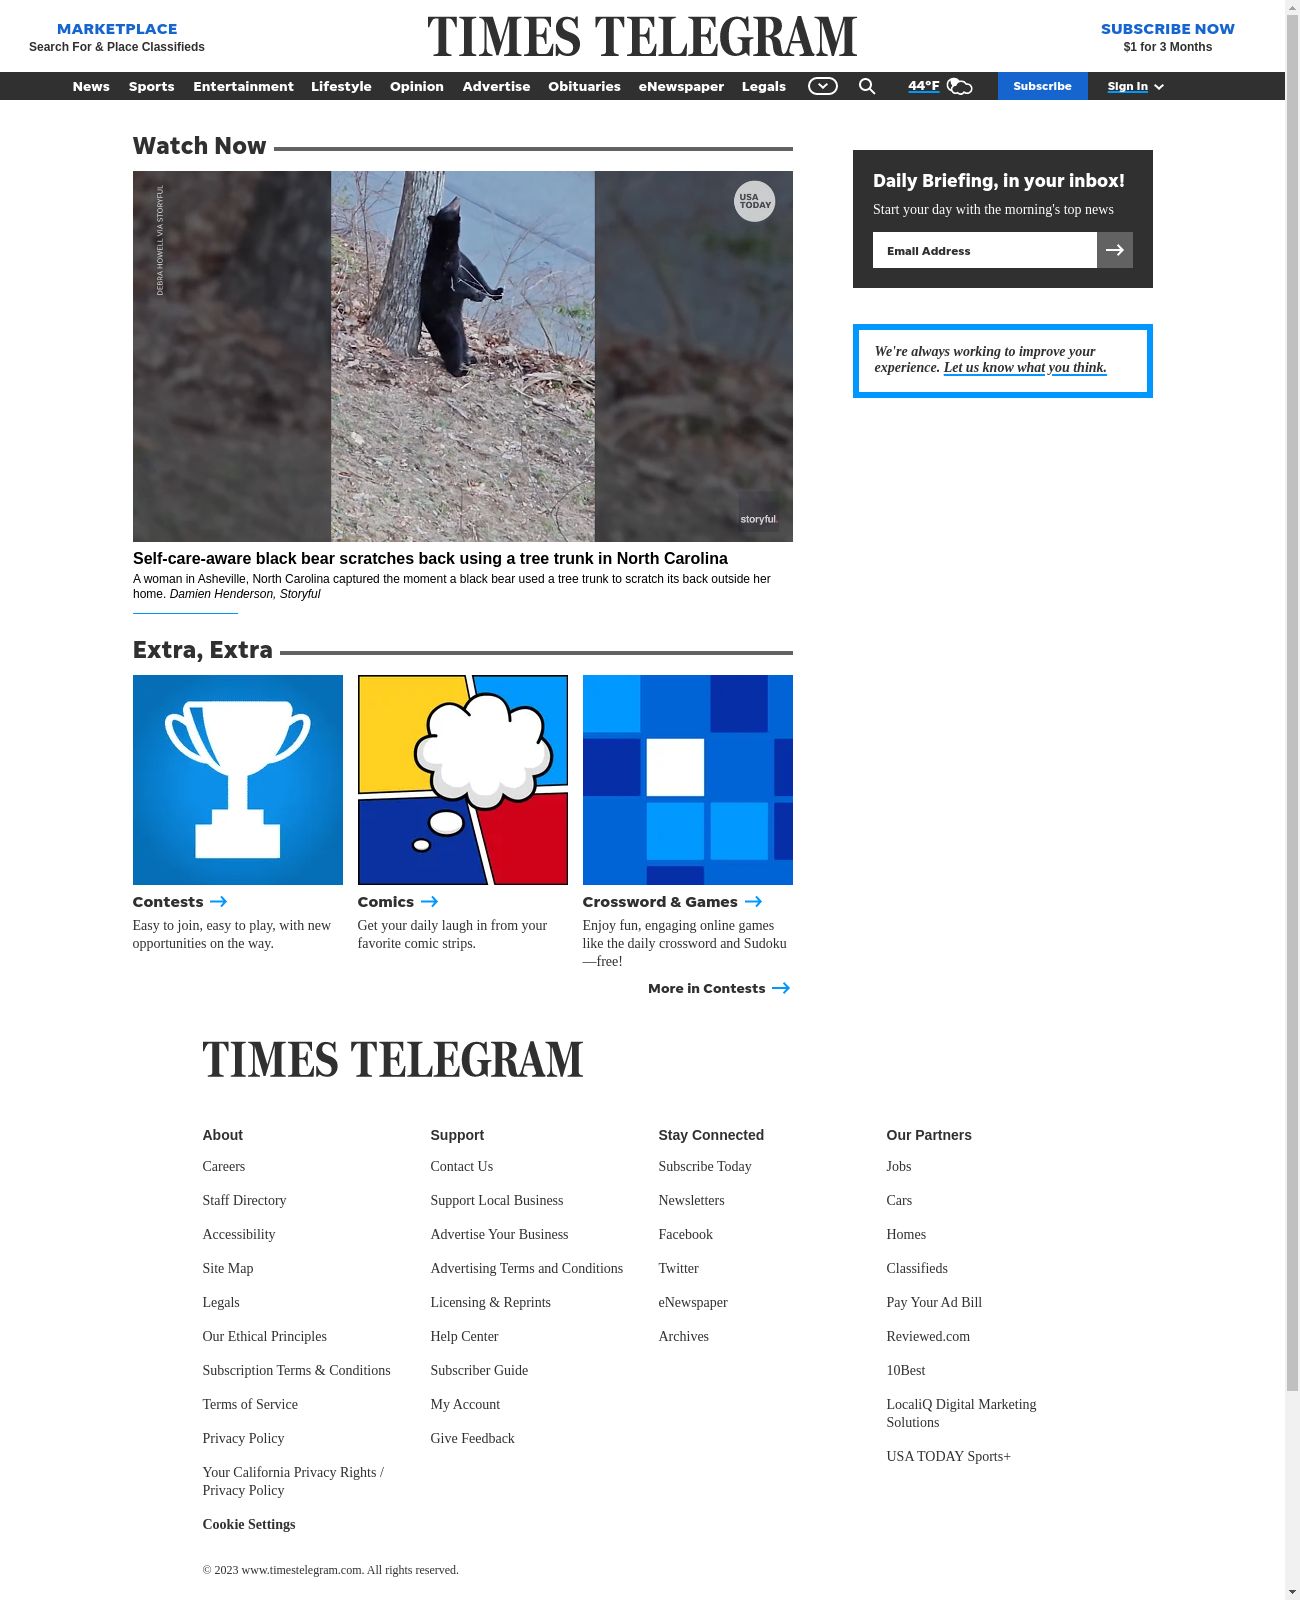 The Times Telegram at 2023-03-23 20:34:50-04:00 local time